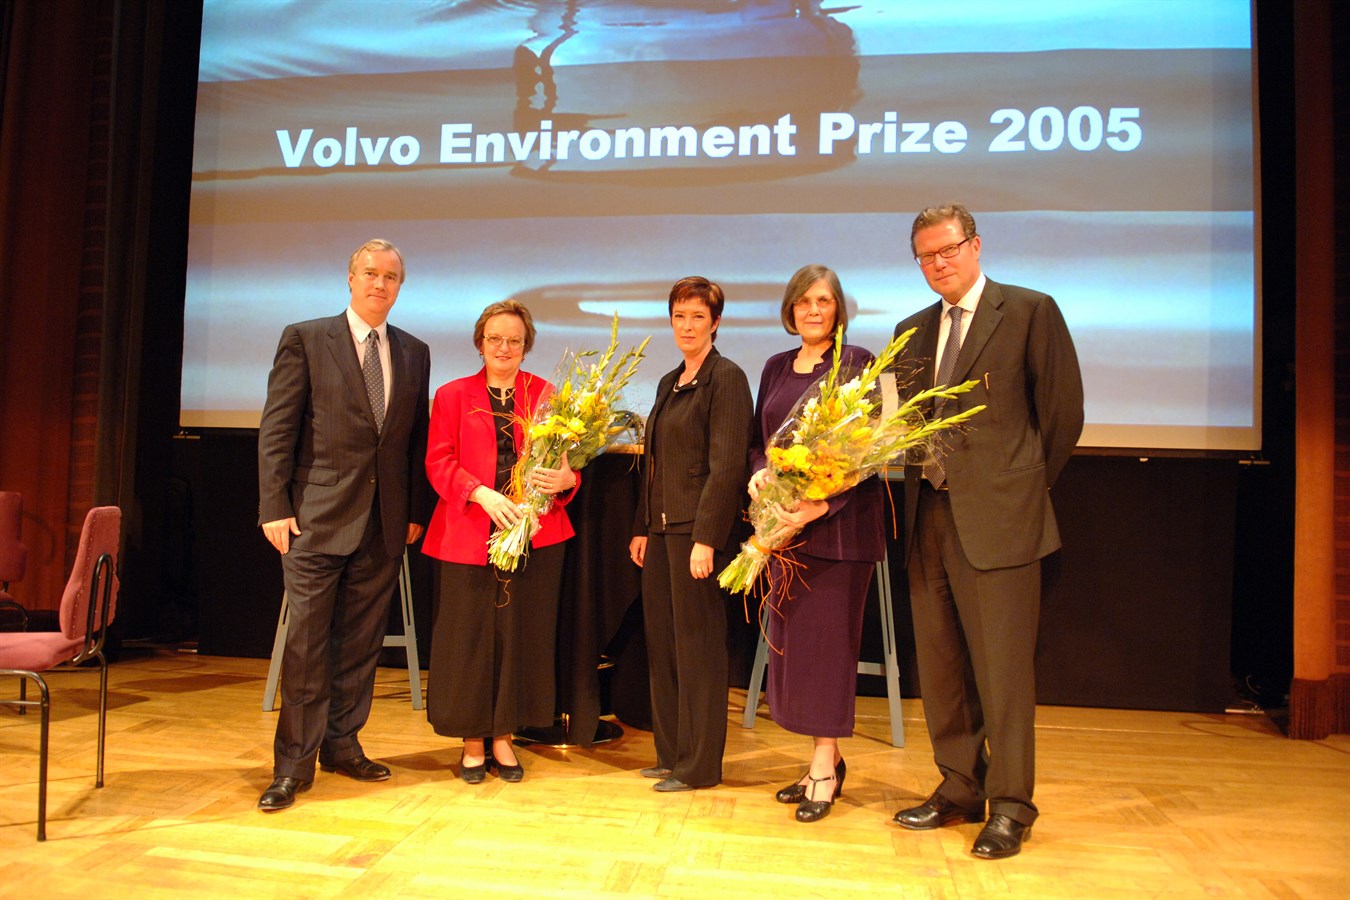 Volvo Environment Prize 2005. Prize handed over to Prof Aila Keto and Dr Mary Kalin Arroyo by Mona Sahlin, Minister of Sustainable Development, Fredrik Arp, Ceo and President Volvo Cars, and Leif Johansson, Ceo and President AB Volvo.